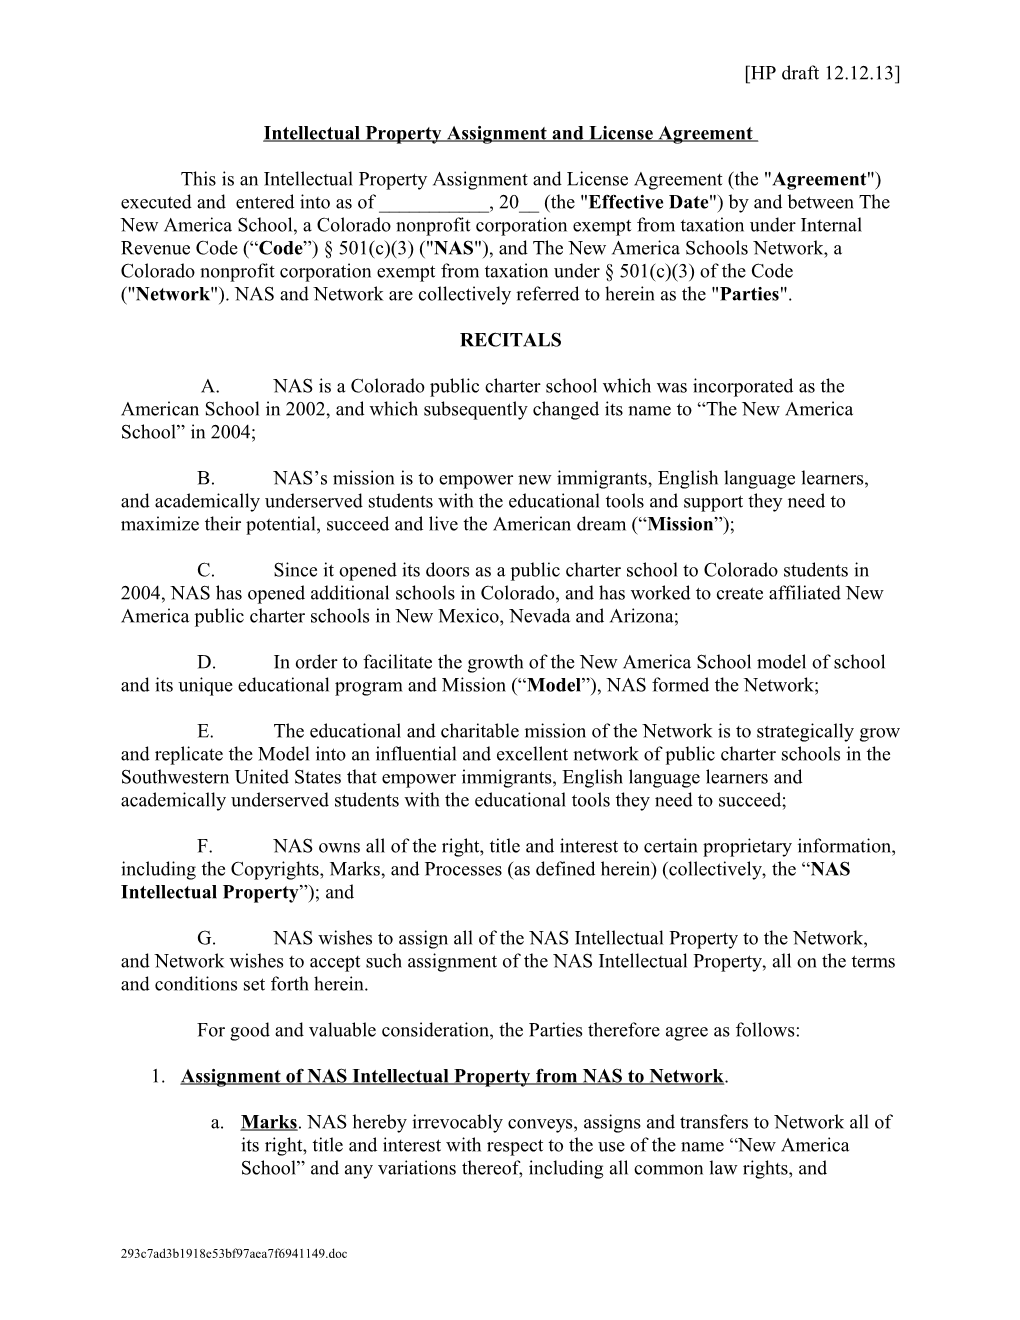 Professional Services Agreement s5